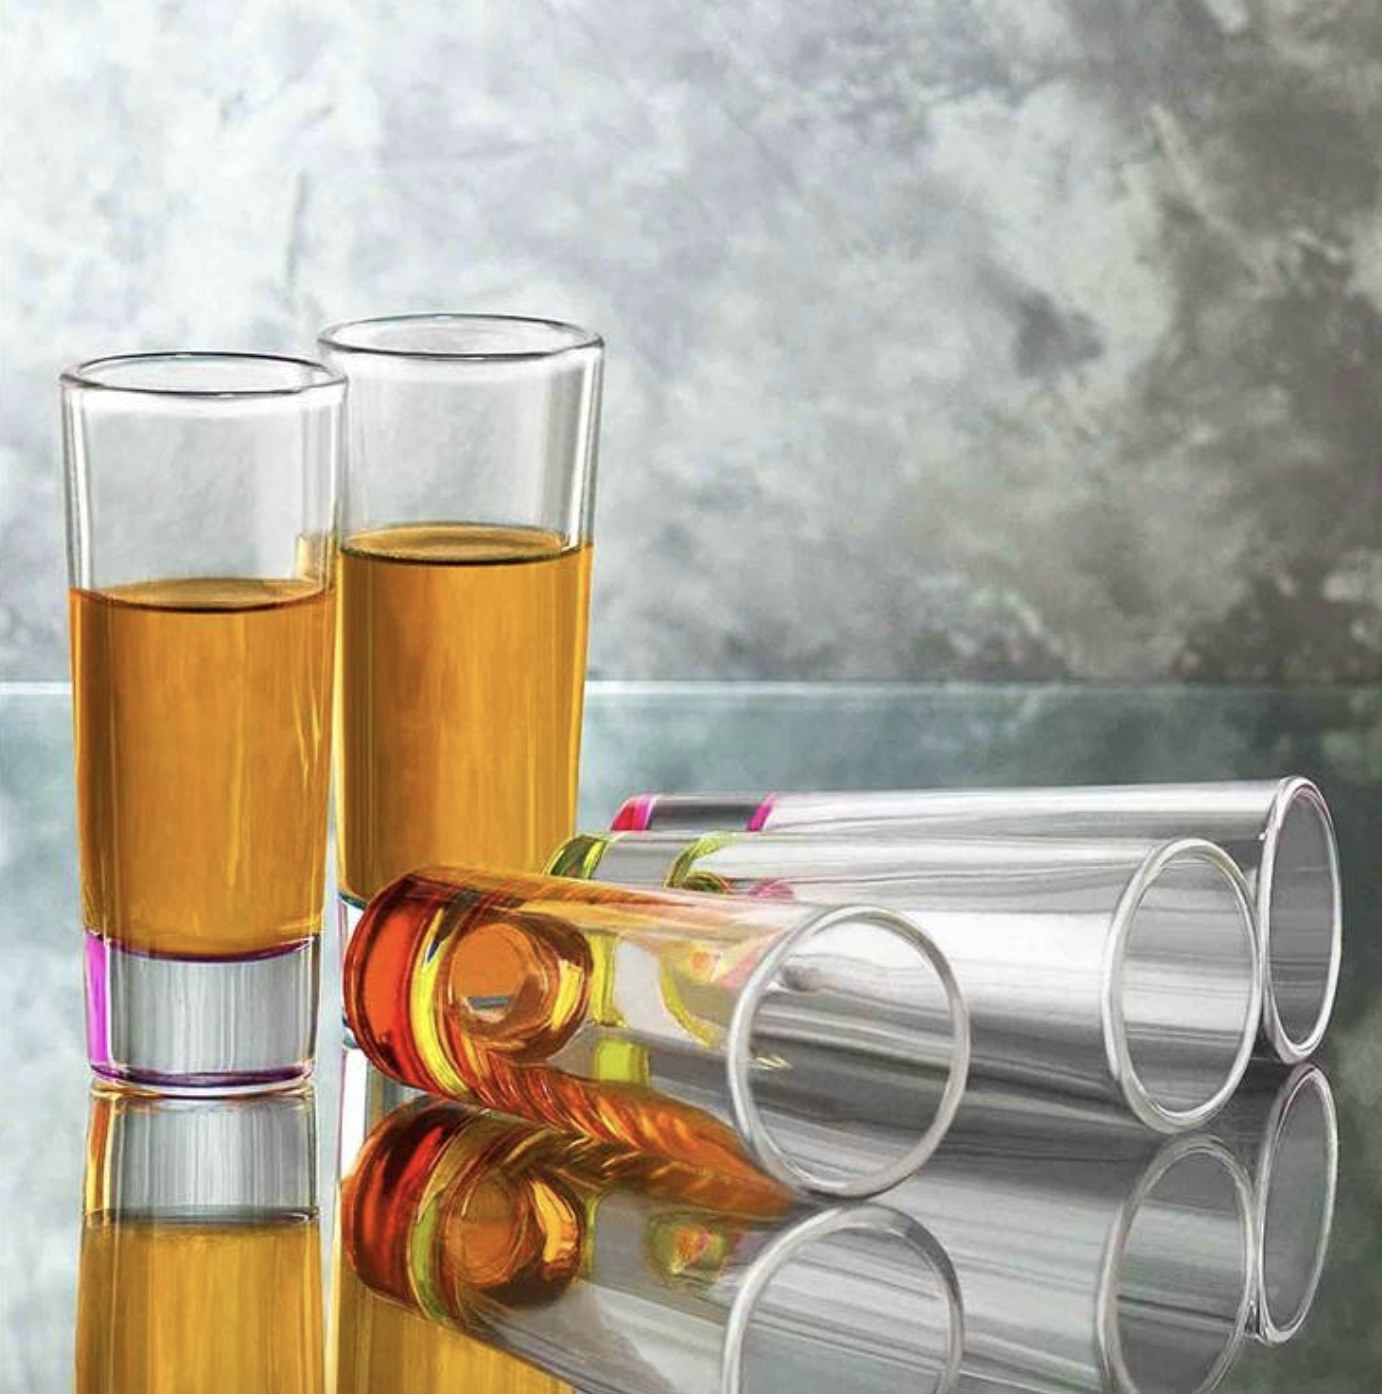 There are two glasses filled with an amber liquid and three others laying horizontally nearby